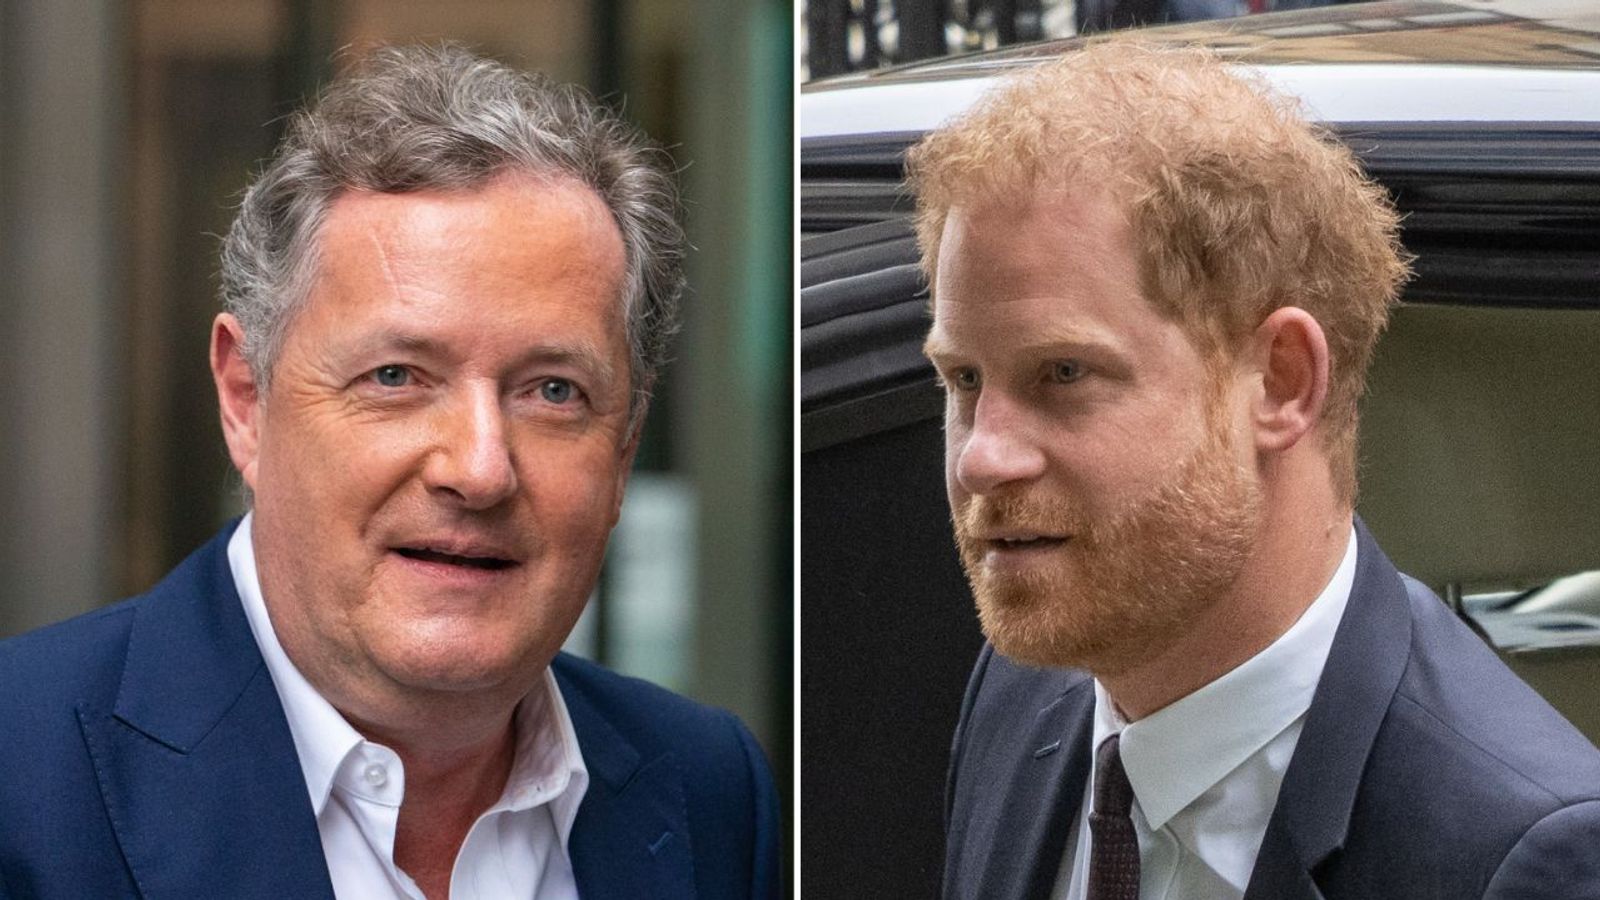 'I'll read about it in his next book' - Piers Morgan hits back at Prince Harry's criticism